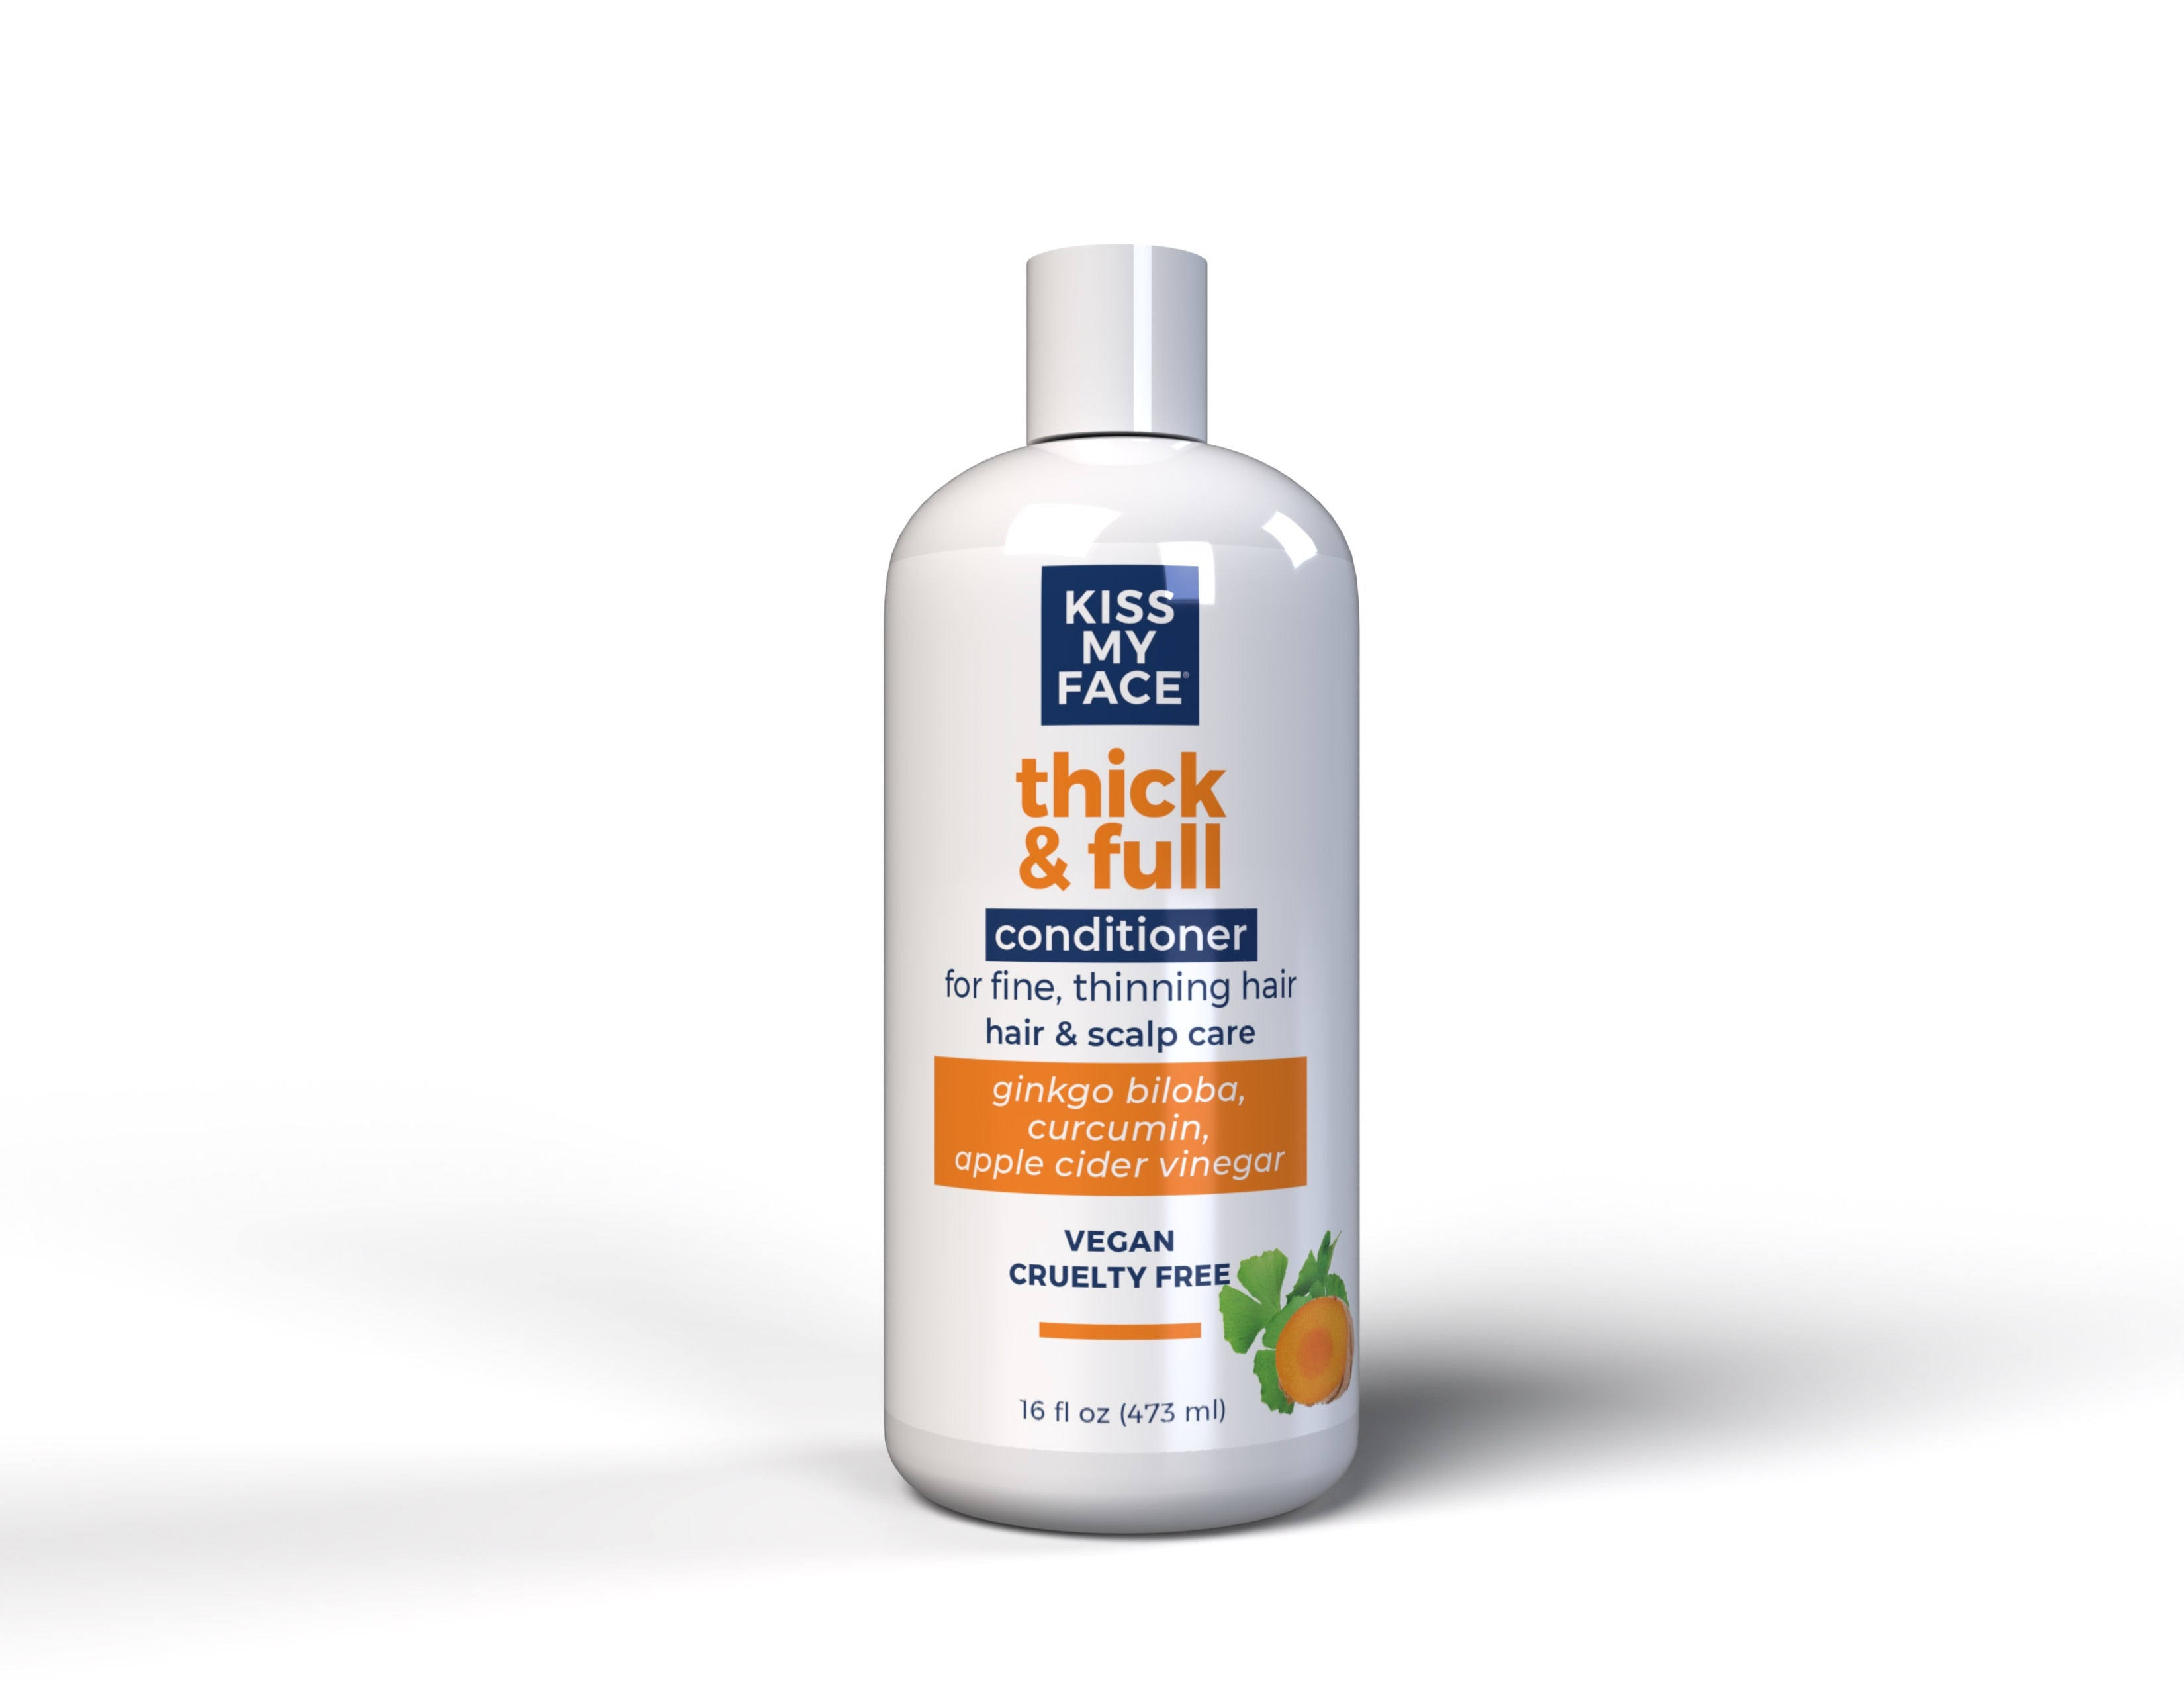 Kiss My Face Thick & Full Conditioner